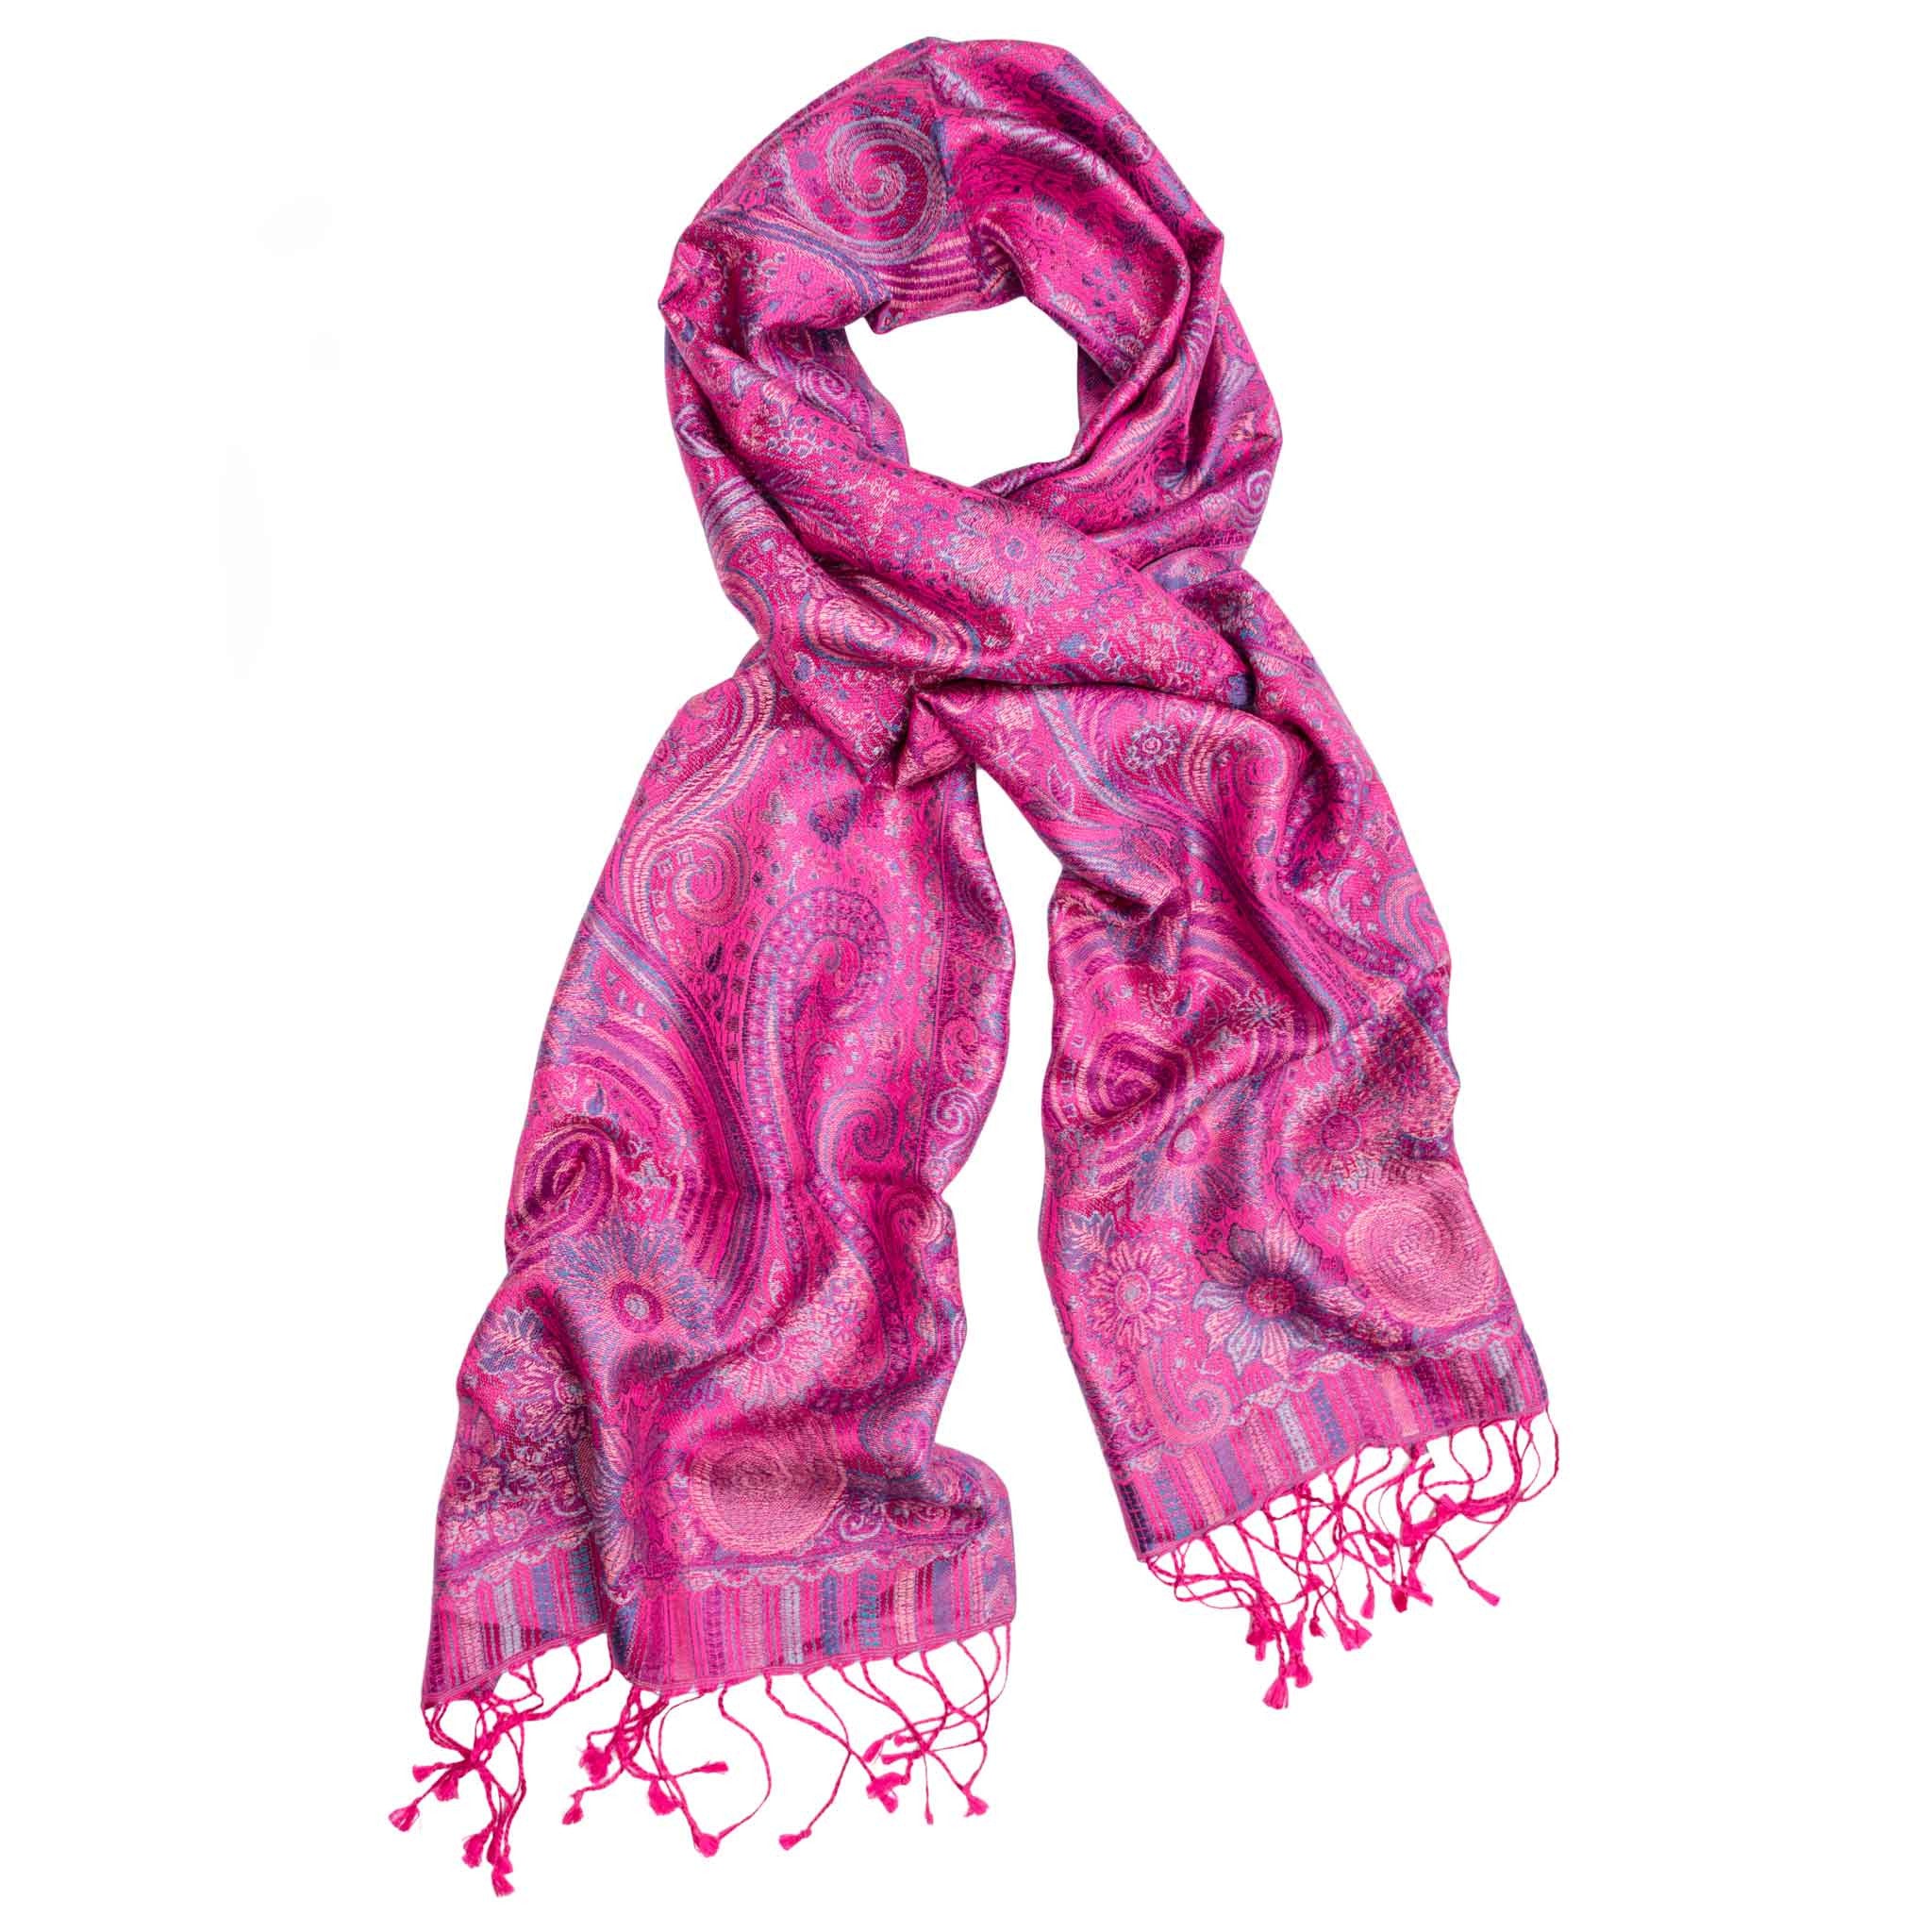 pink scarf